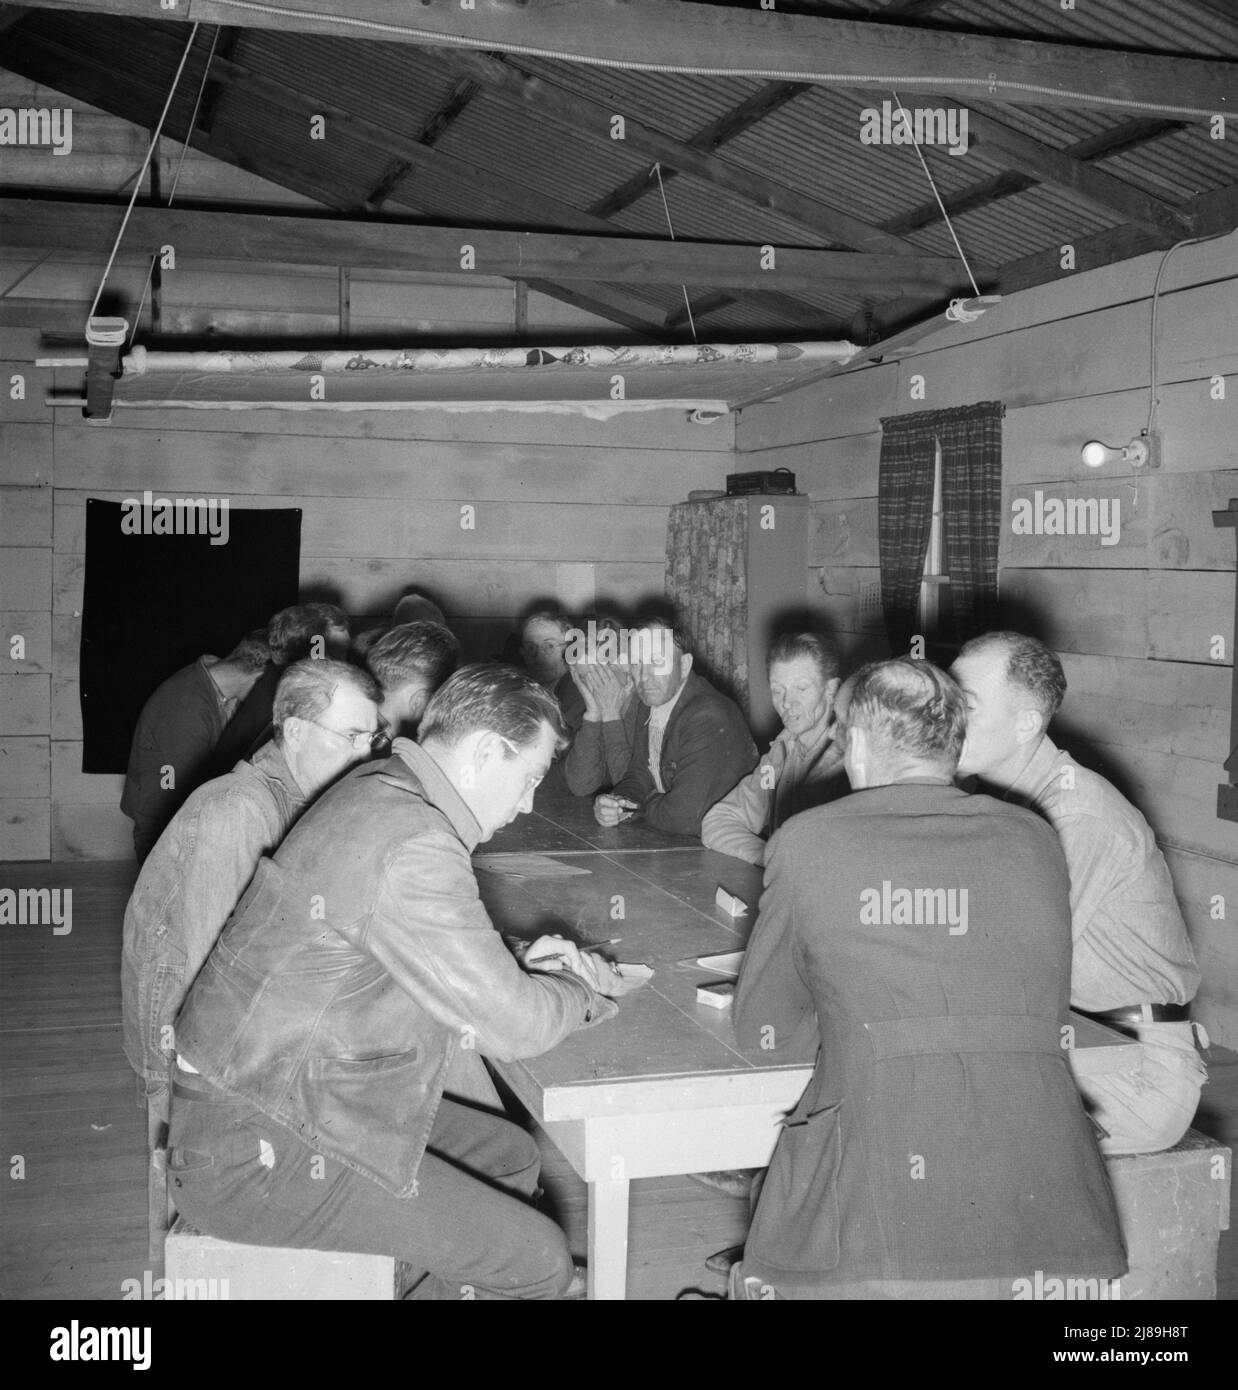 Farm Security Administration (FSA) camp for migratory agricultural workers. Farmersville, California. Meeting of the camp council. Stock Photo